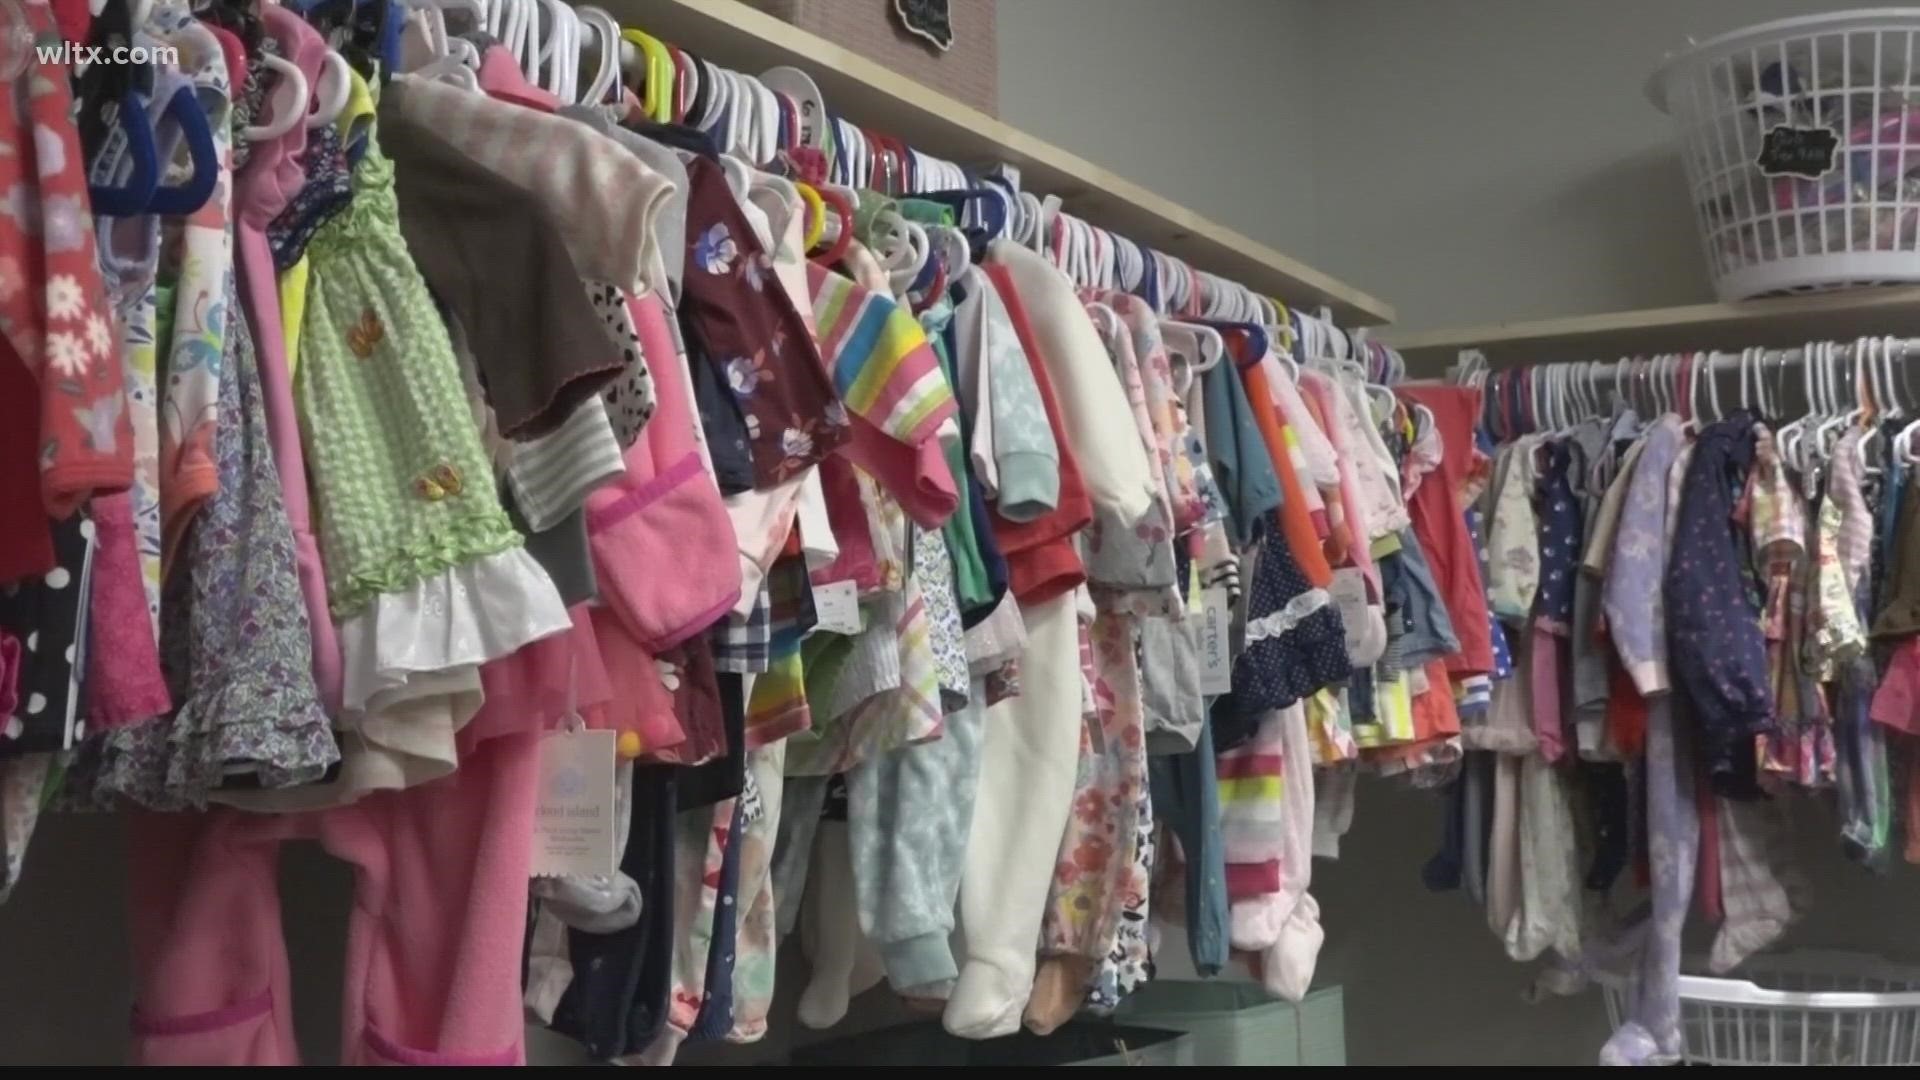 The nonprofit organization supports the foster community throughout the Lowcountry with clothing and other essential items.